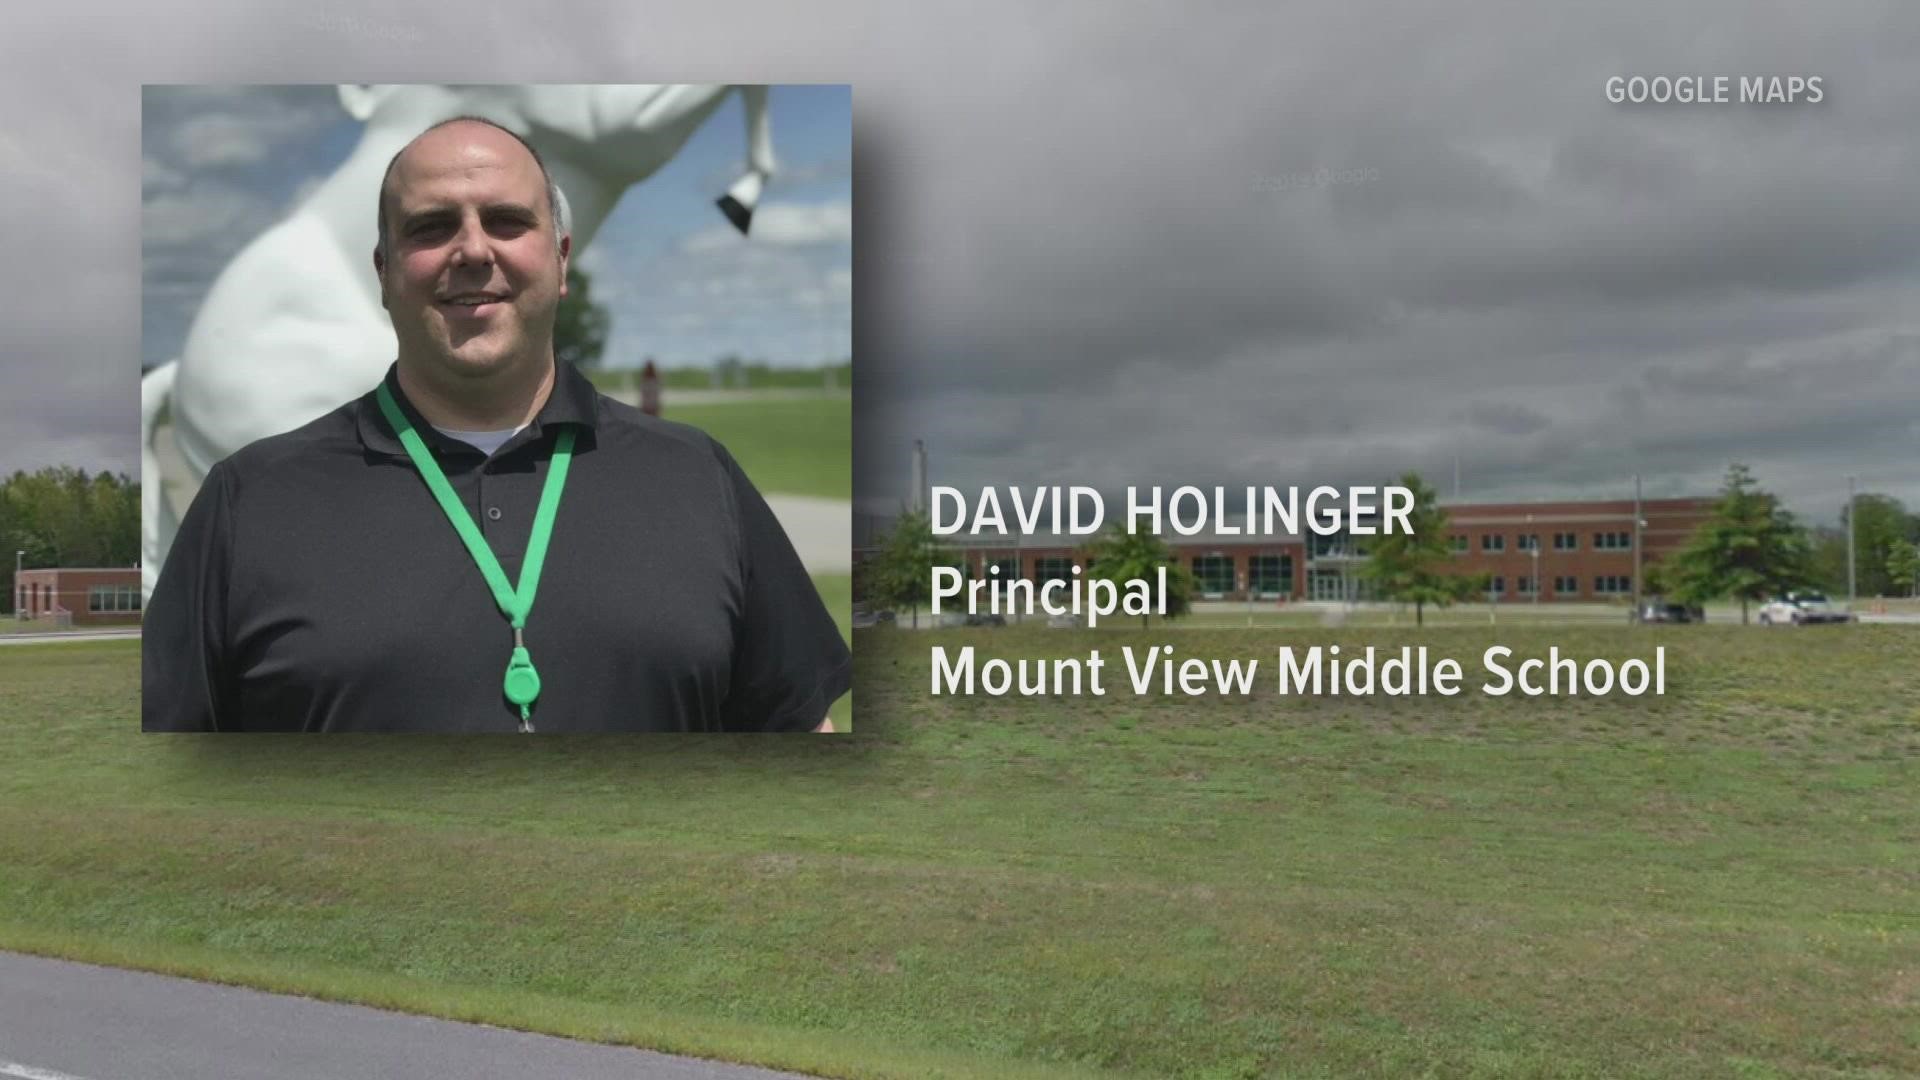 Police say David Holinger of Belgrade, principal of the Mount View Middle School, is facing three charges, and is expected to appear in court next month.